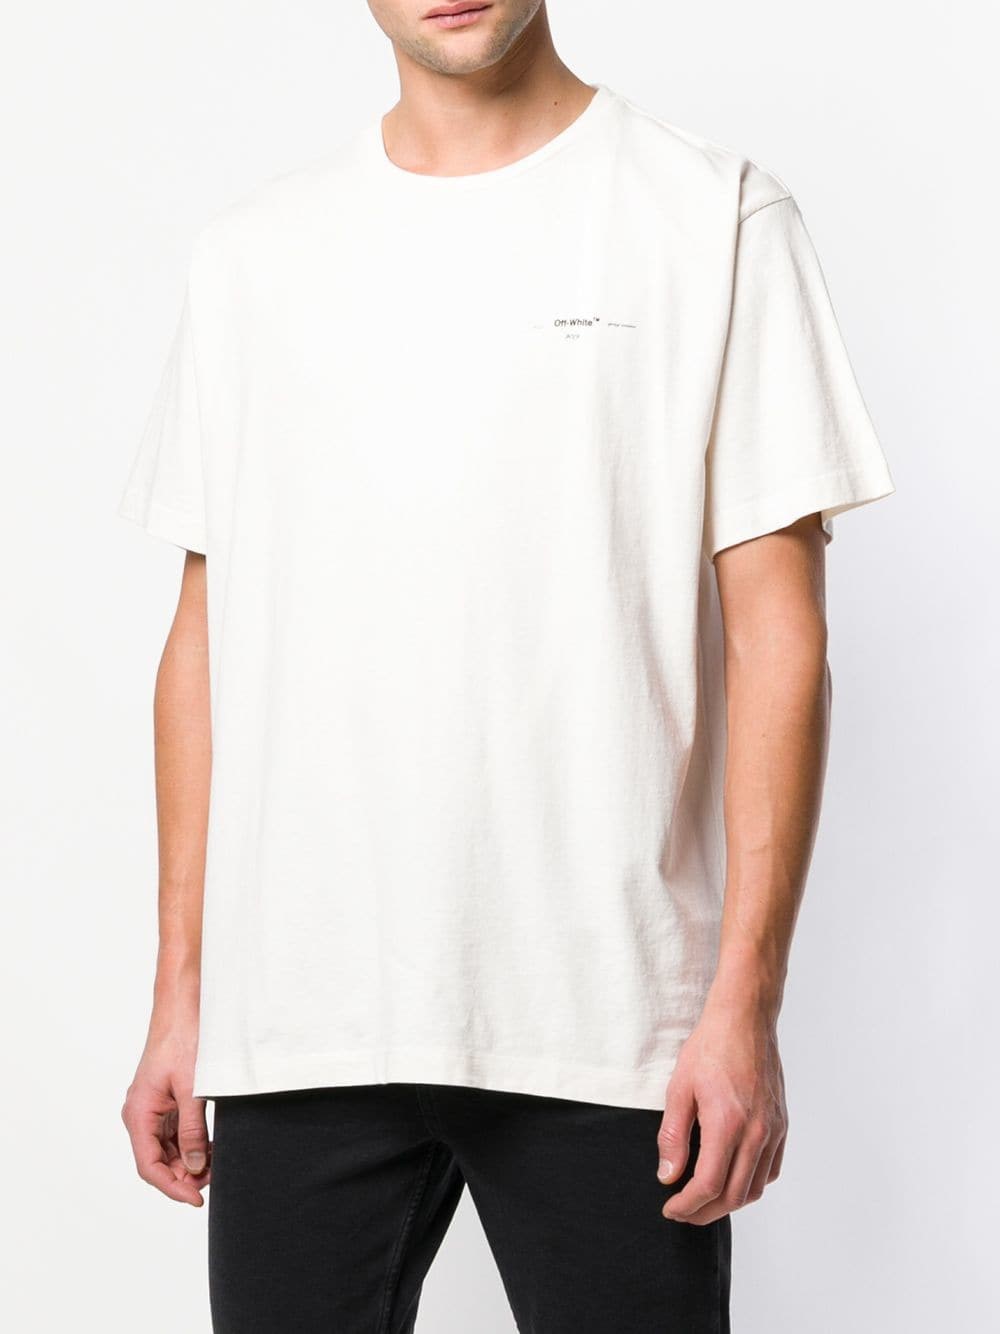 off-white COLORED ARROWS T-SHIRT available on montiboutique.com - 25991